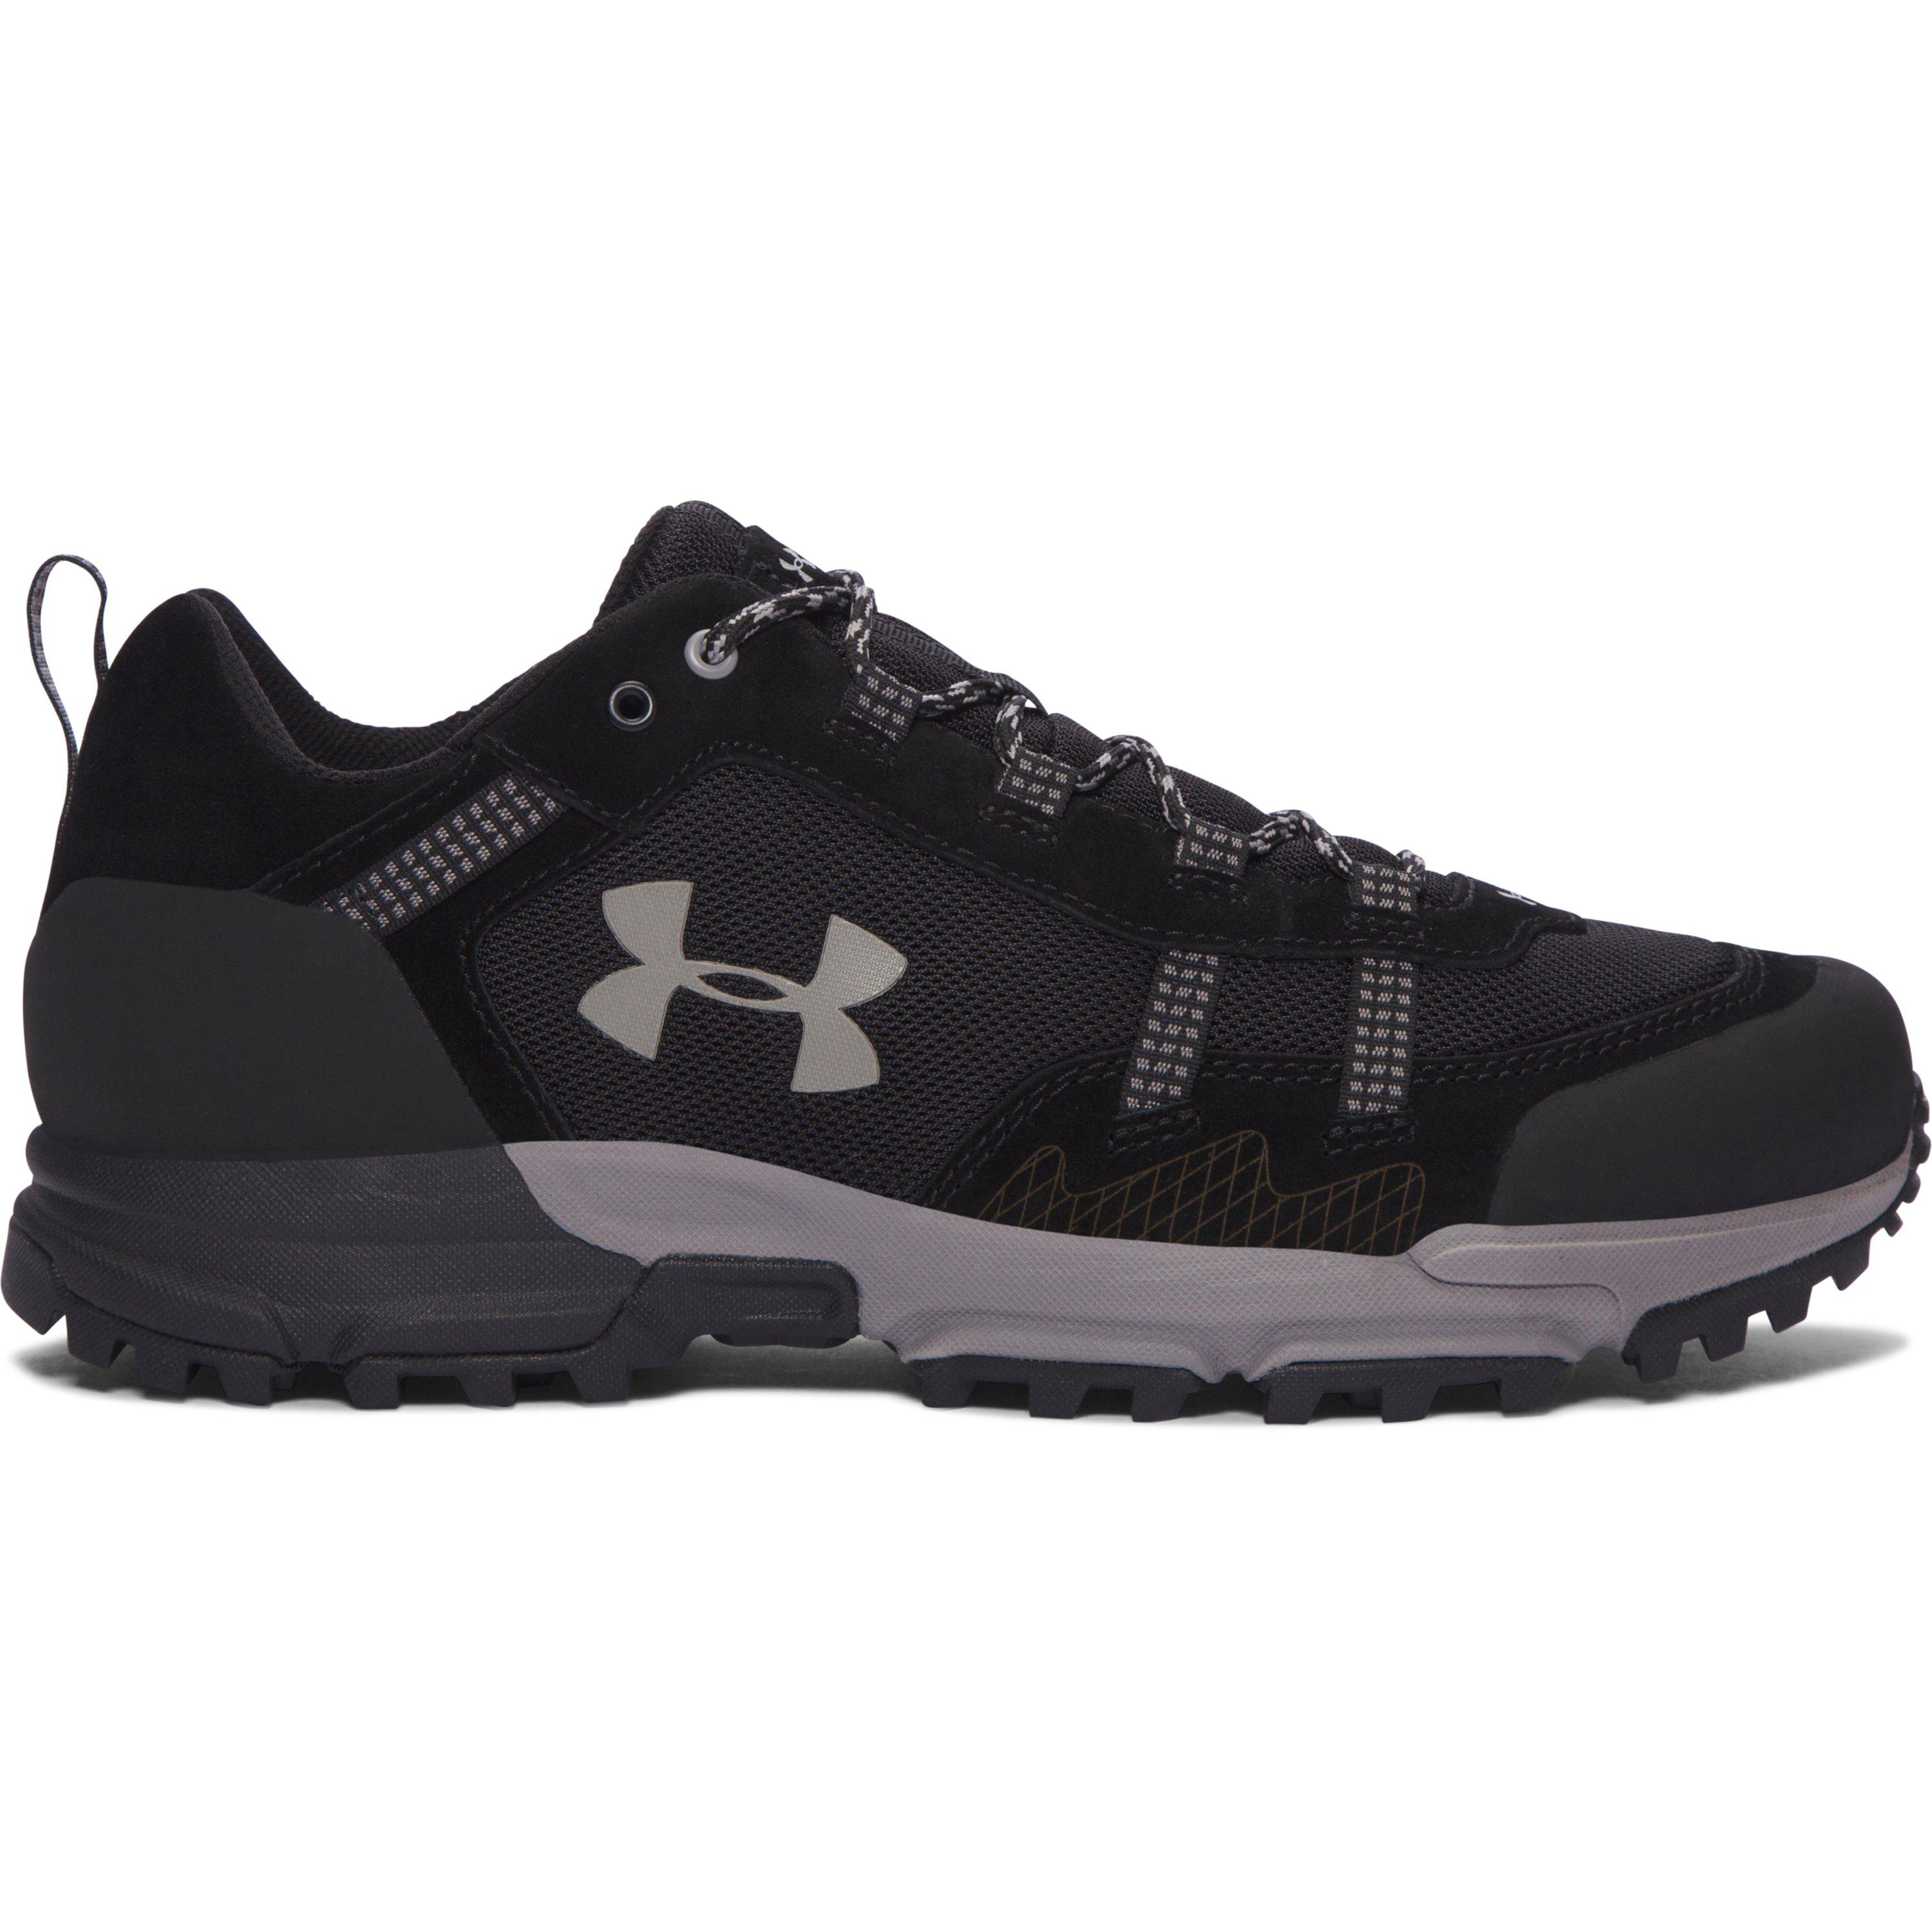 Under Armour Suede Men's Ua Post Canyon Low Hiking Boots in Black ...